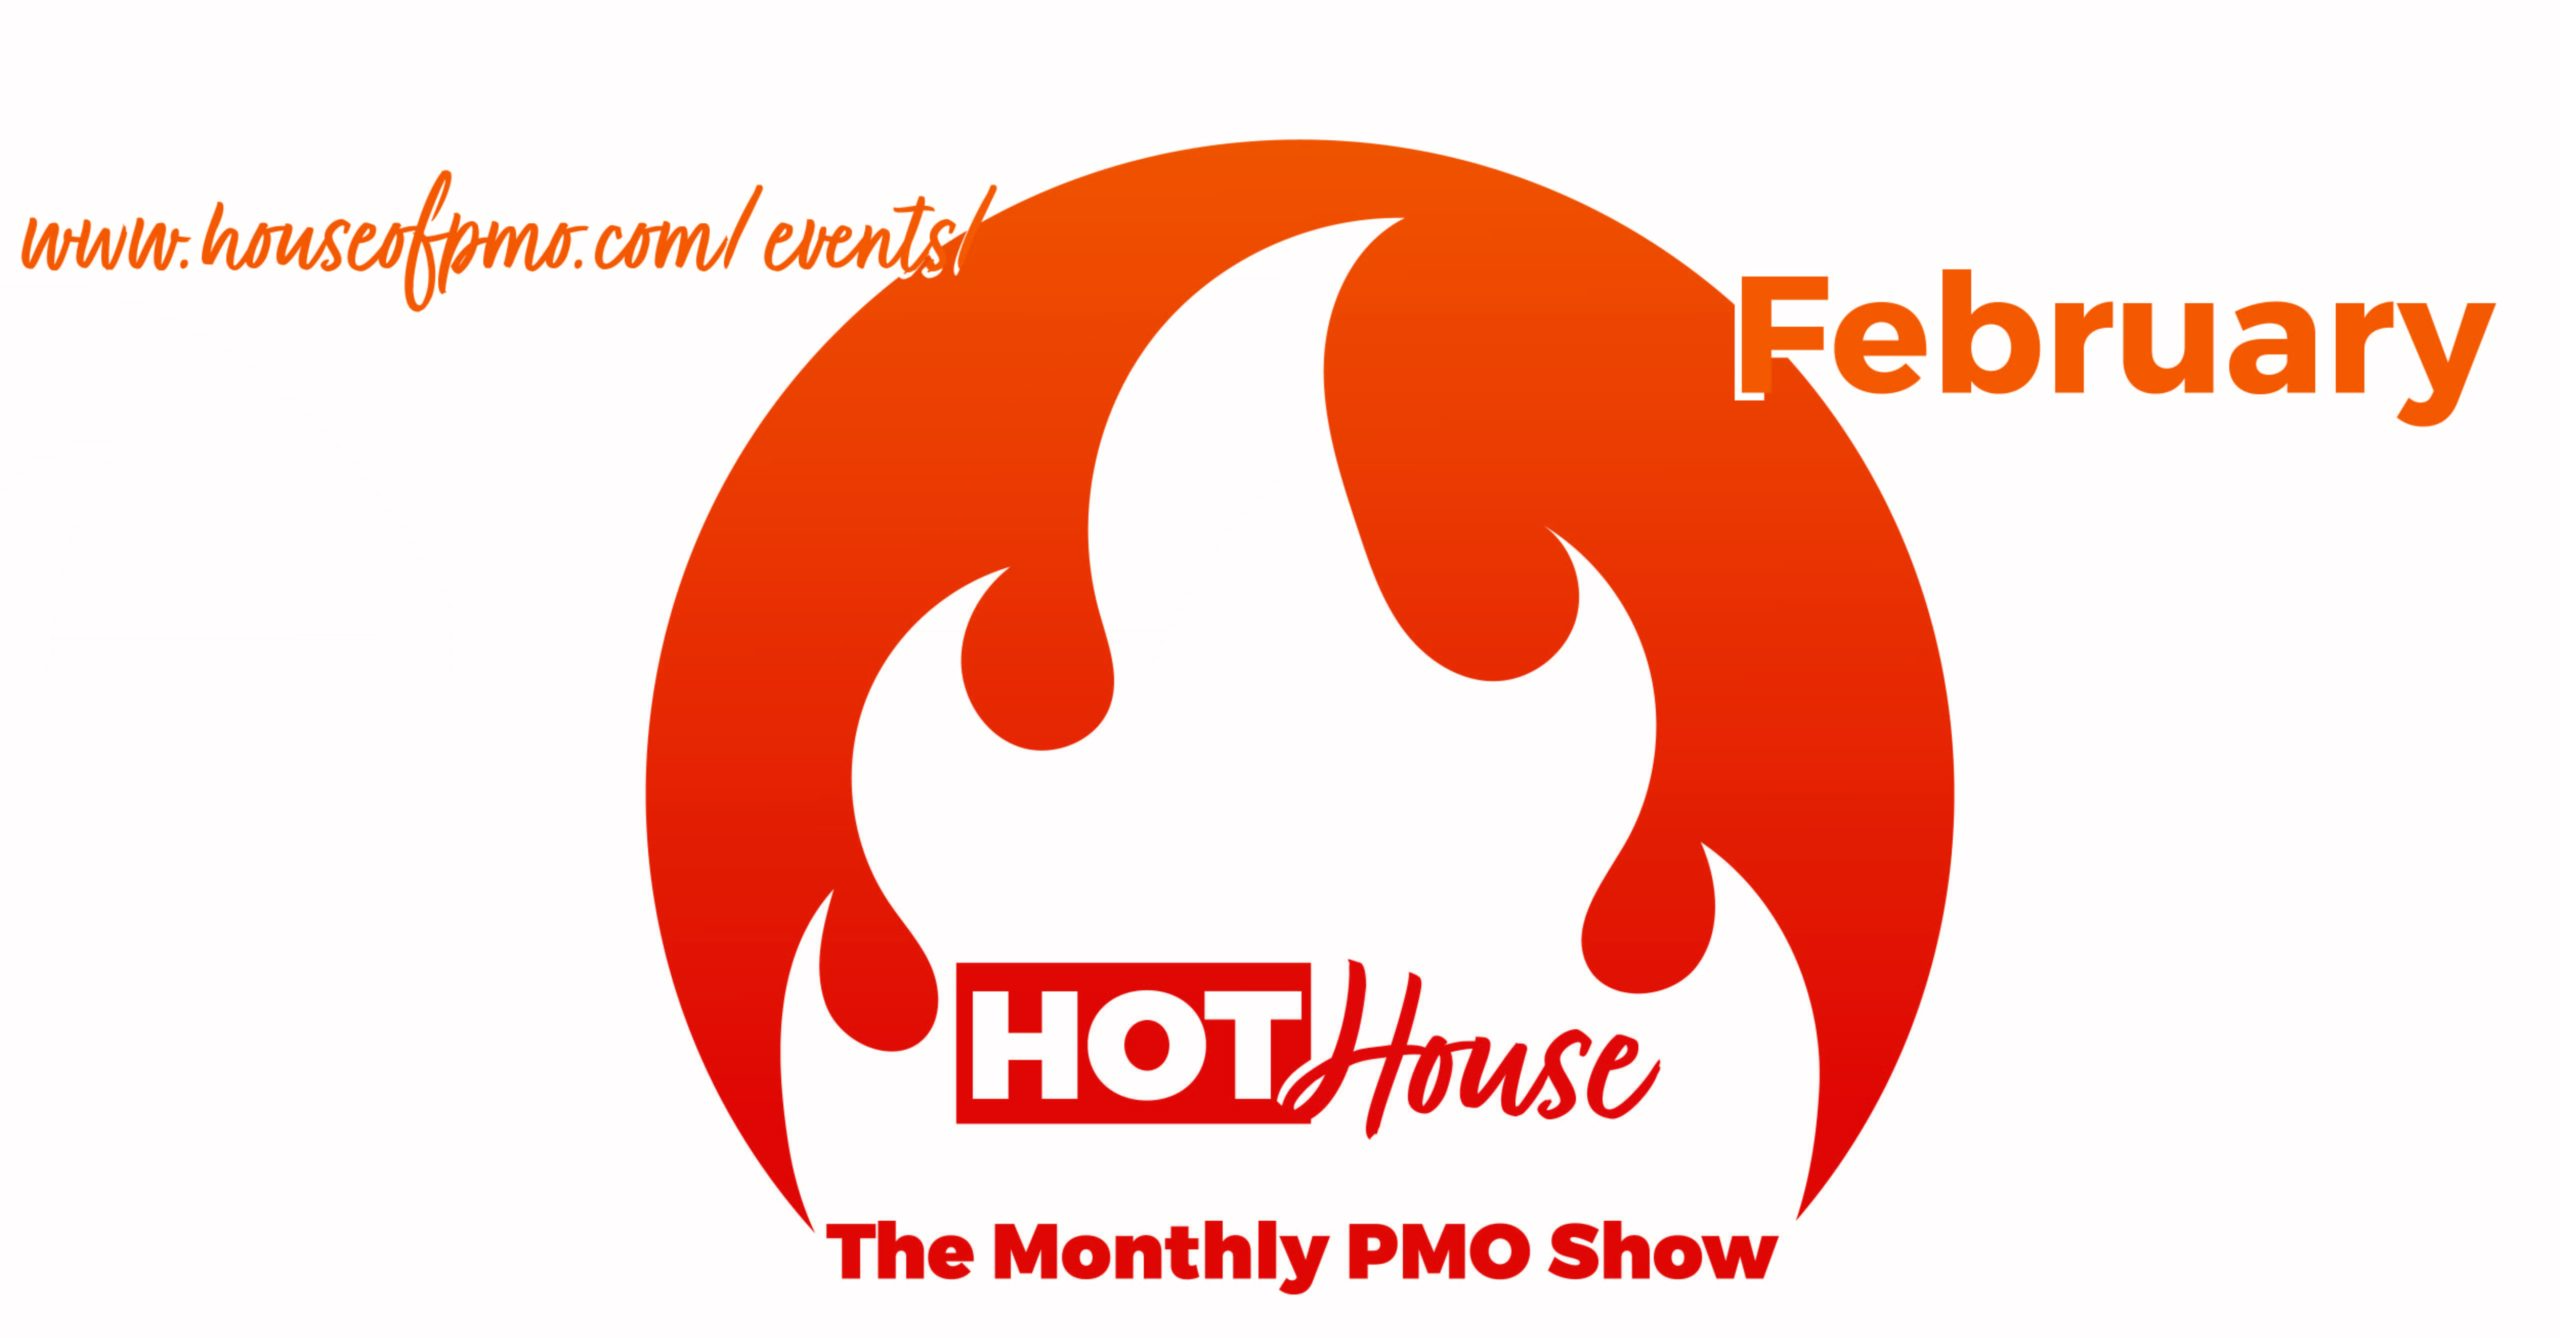 event for pmo hot house in february